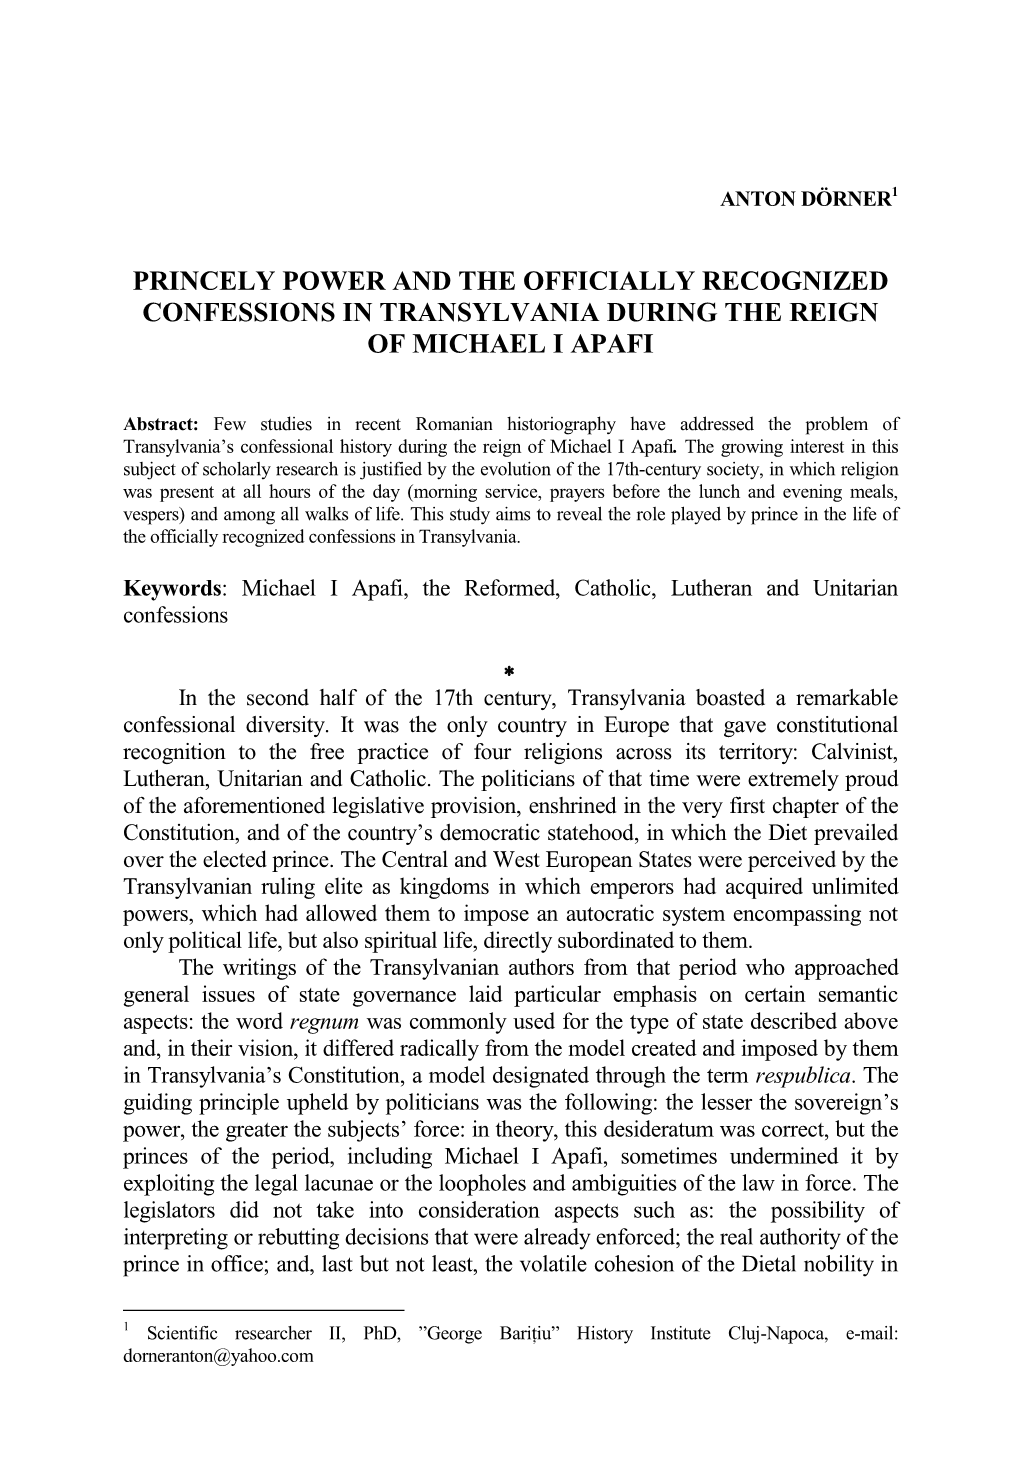 Princely Power and the Officially Recognized Confessions in Transylvania During the Reign of Michael I Apafi